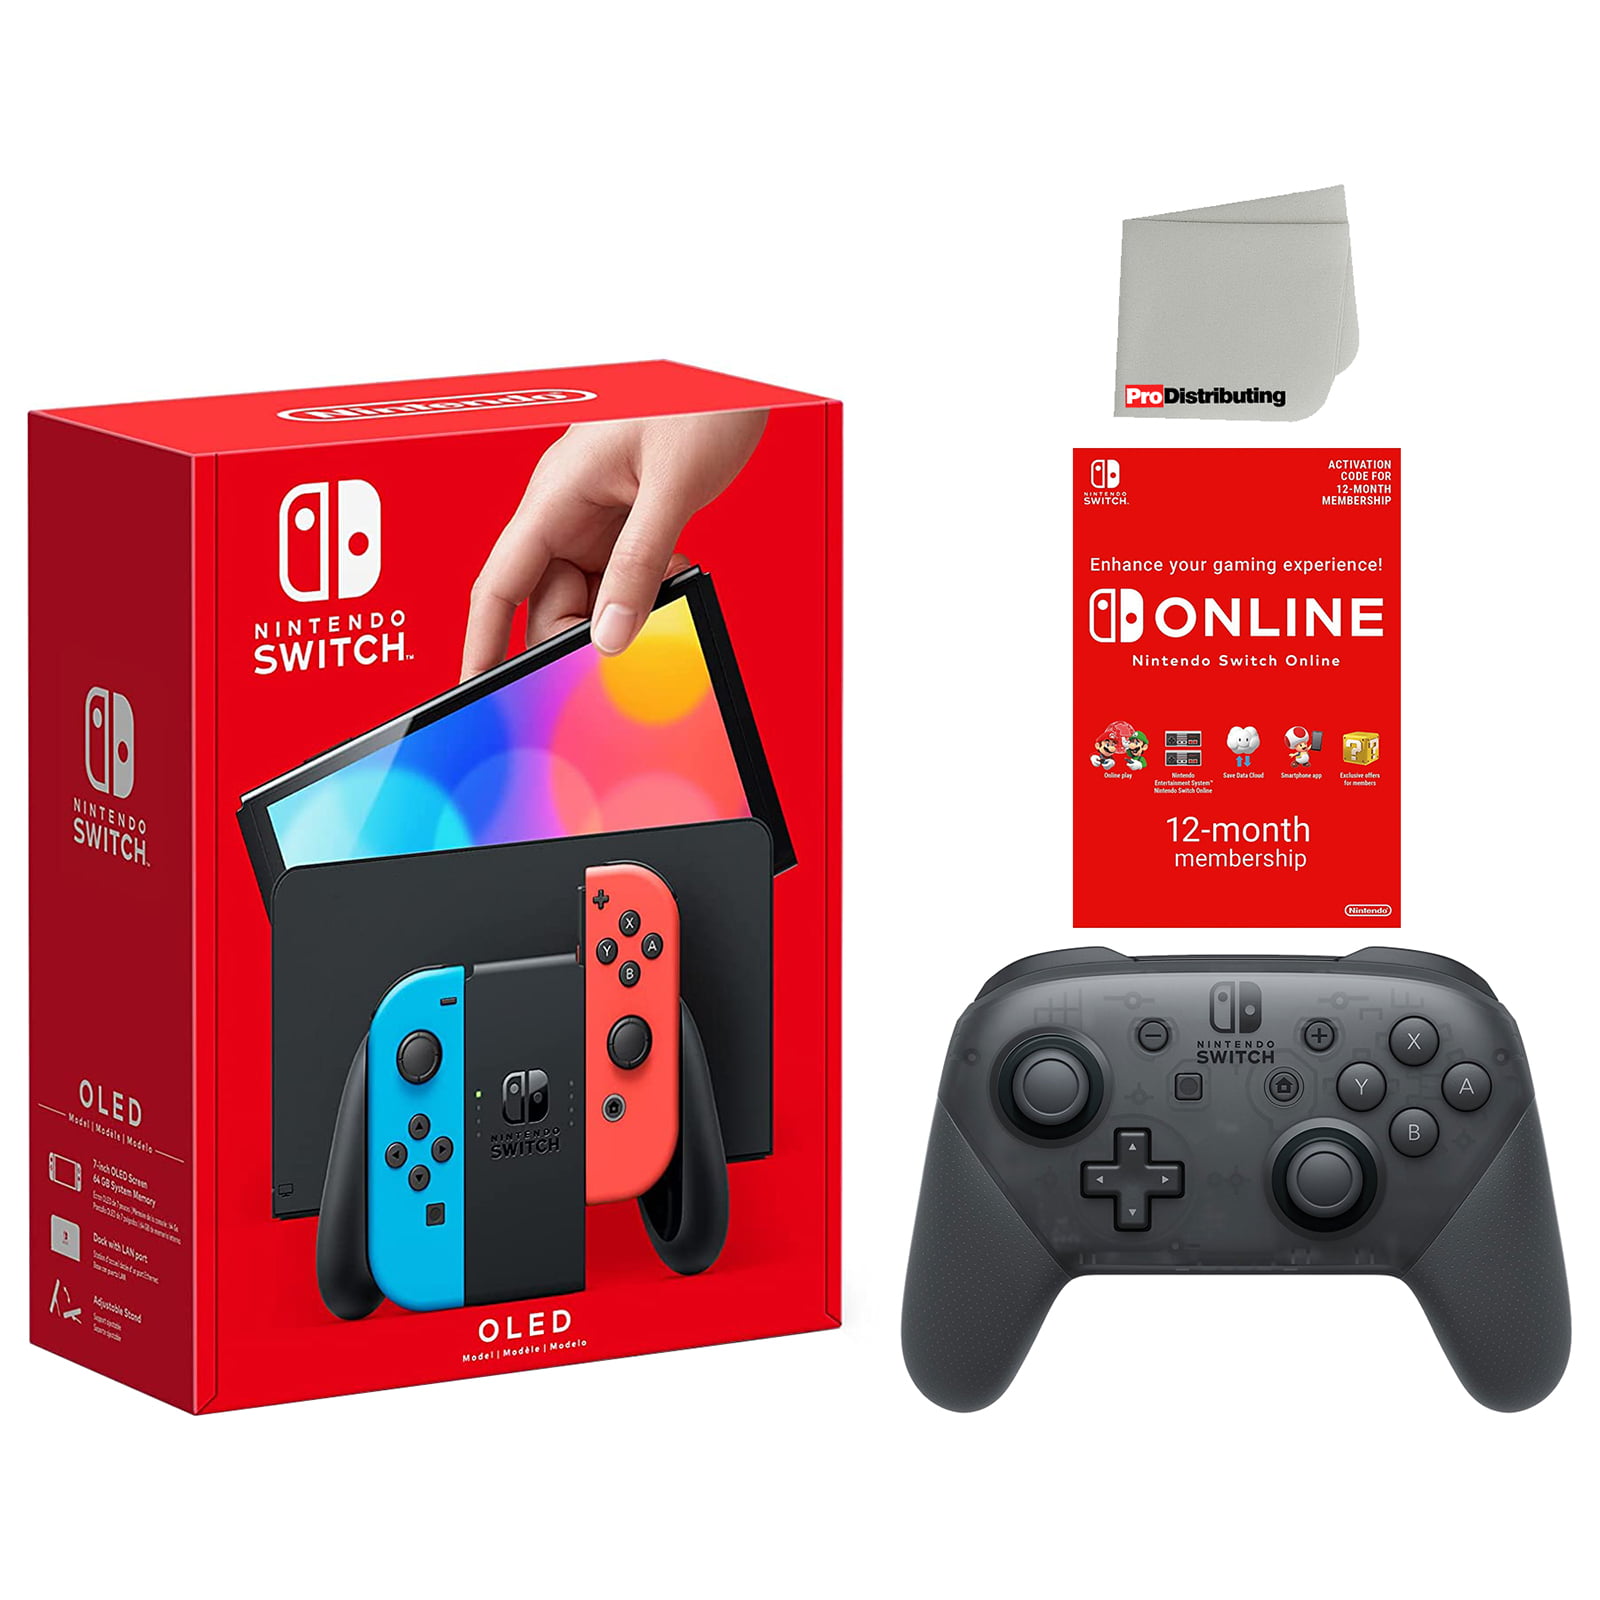 Nintendo Switch Bundle Month Online Controller, Console Membership - Microfiber 12 with Cloth and Pro Family US Cleaning Joy-Con OLED Neon Plug Import with